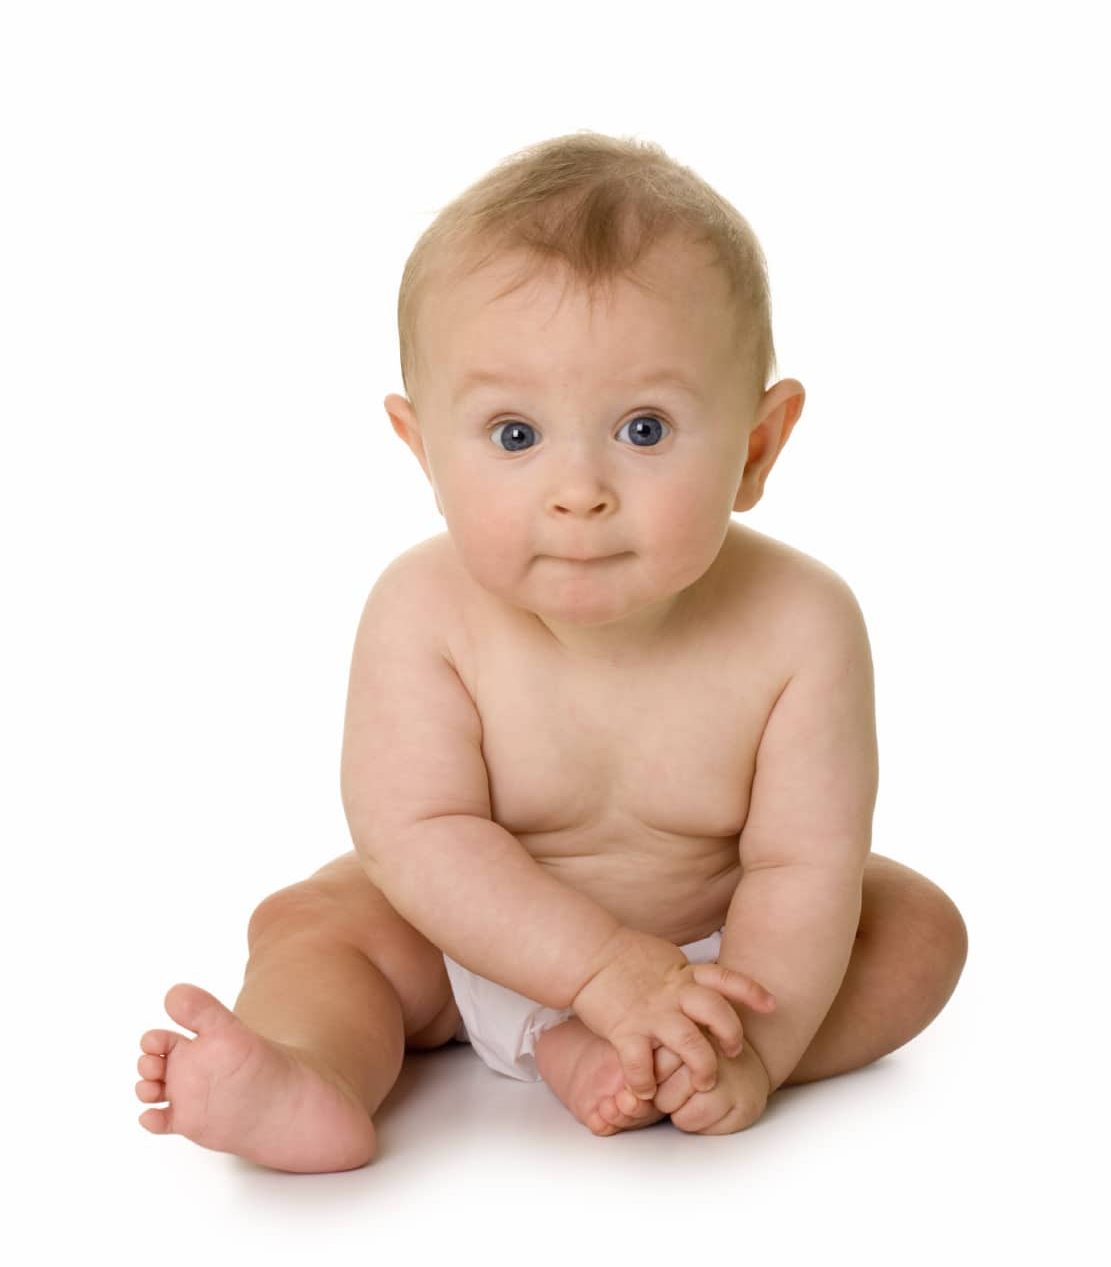 A child wearing only a diaper and sitting up